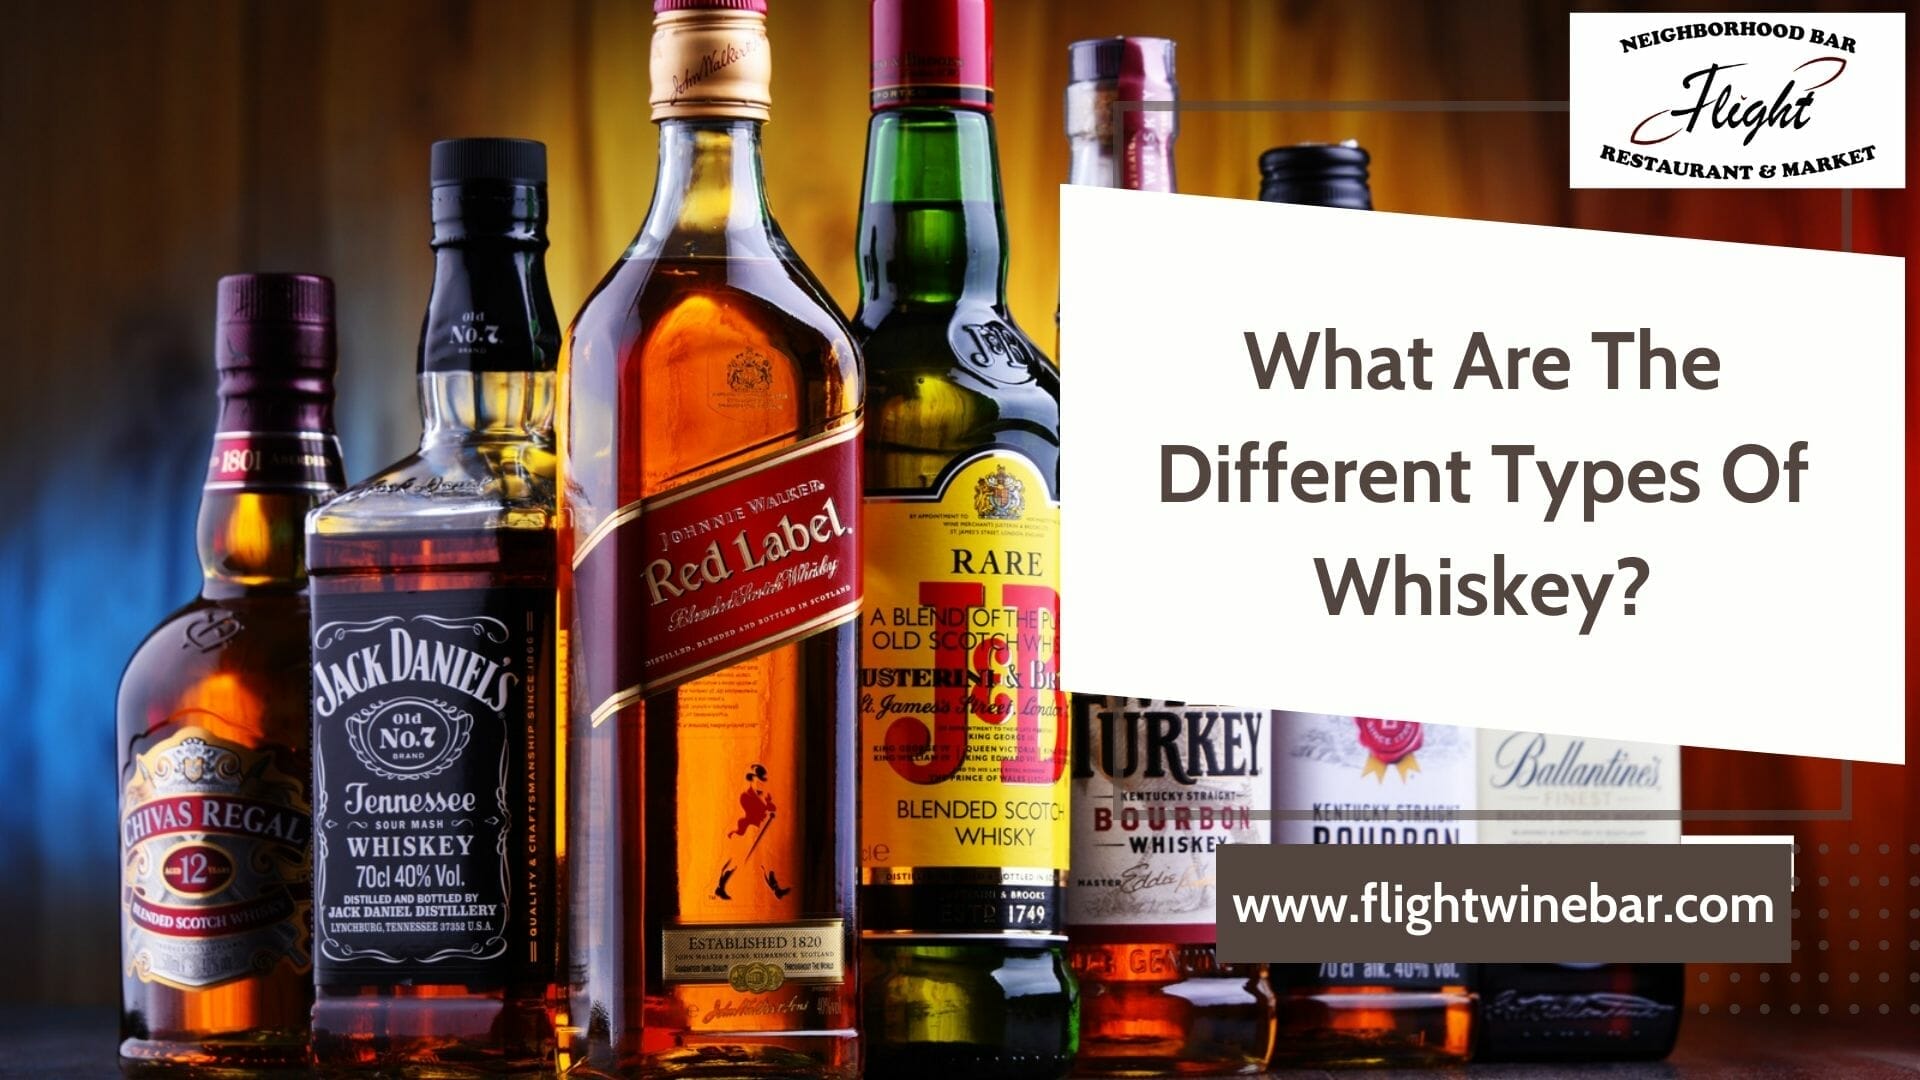 What Are The Different Types Of Whiskey